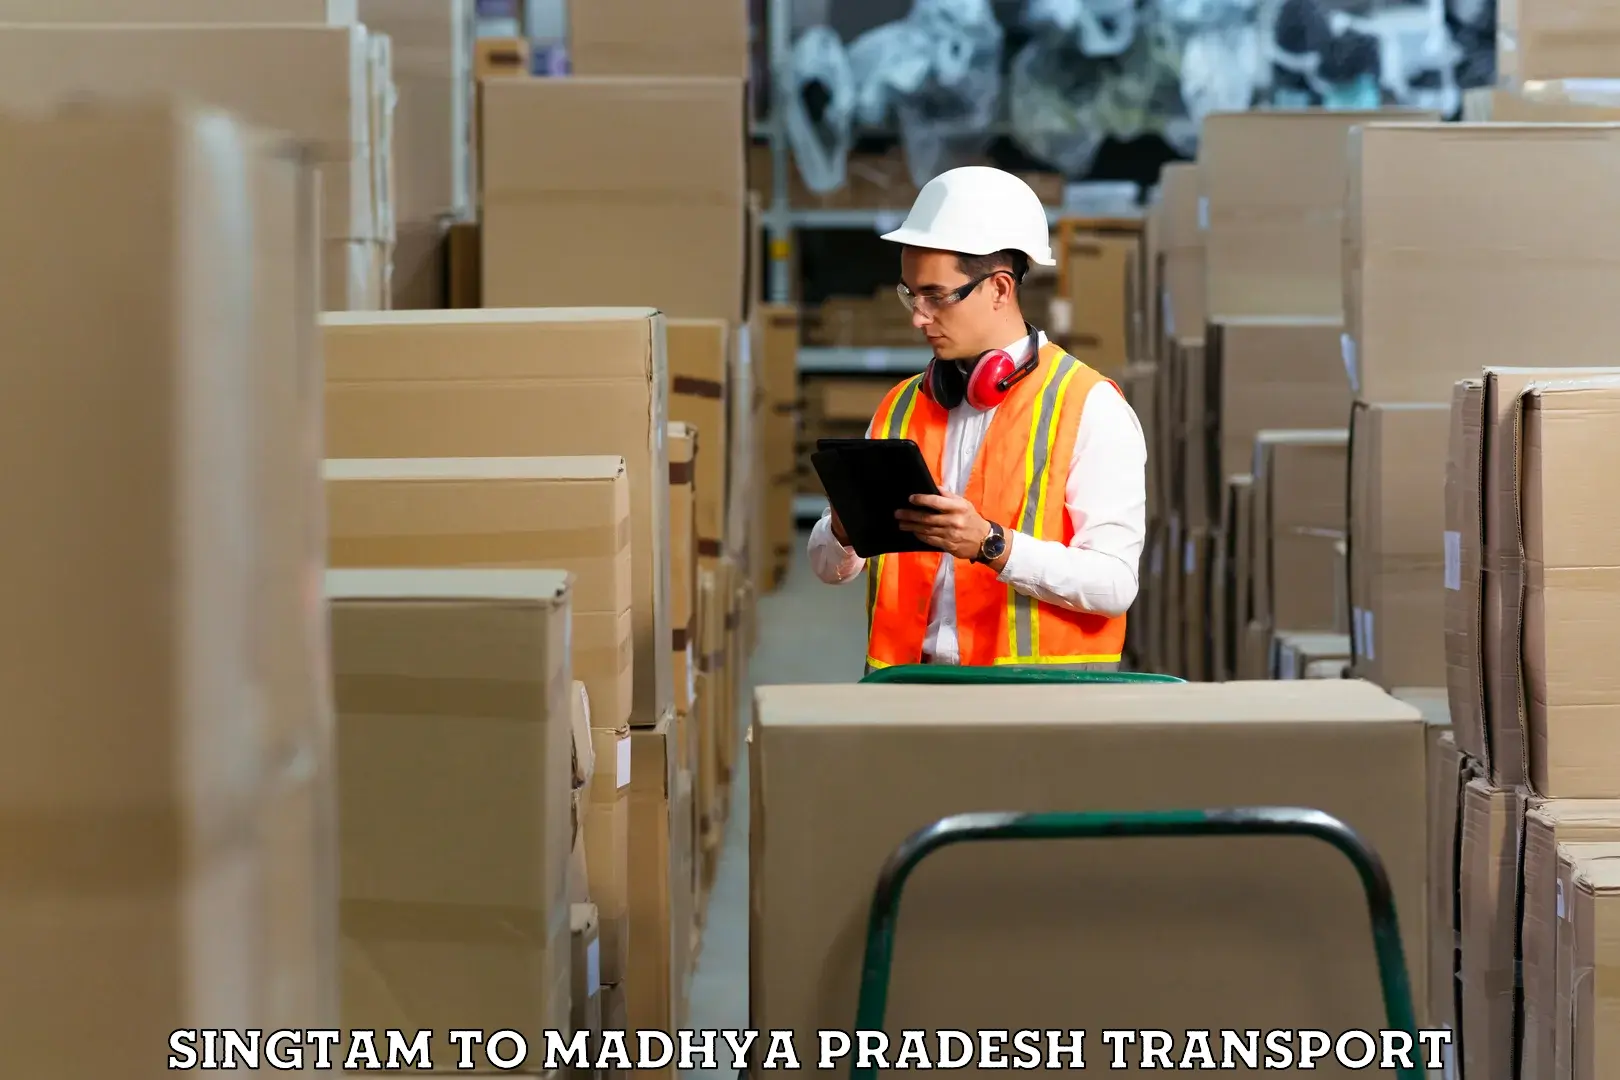 Shipping services Singtam to Madwas